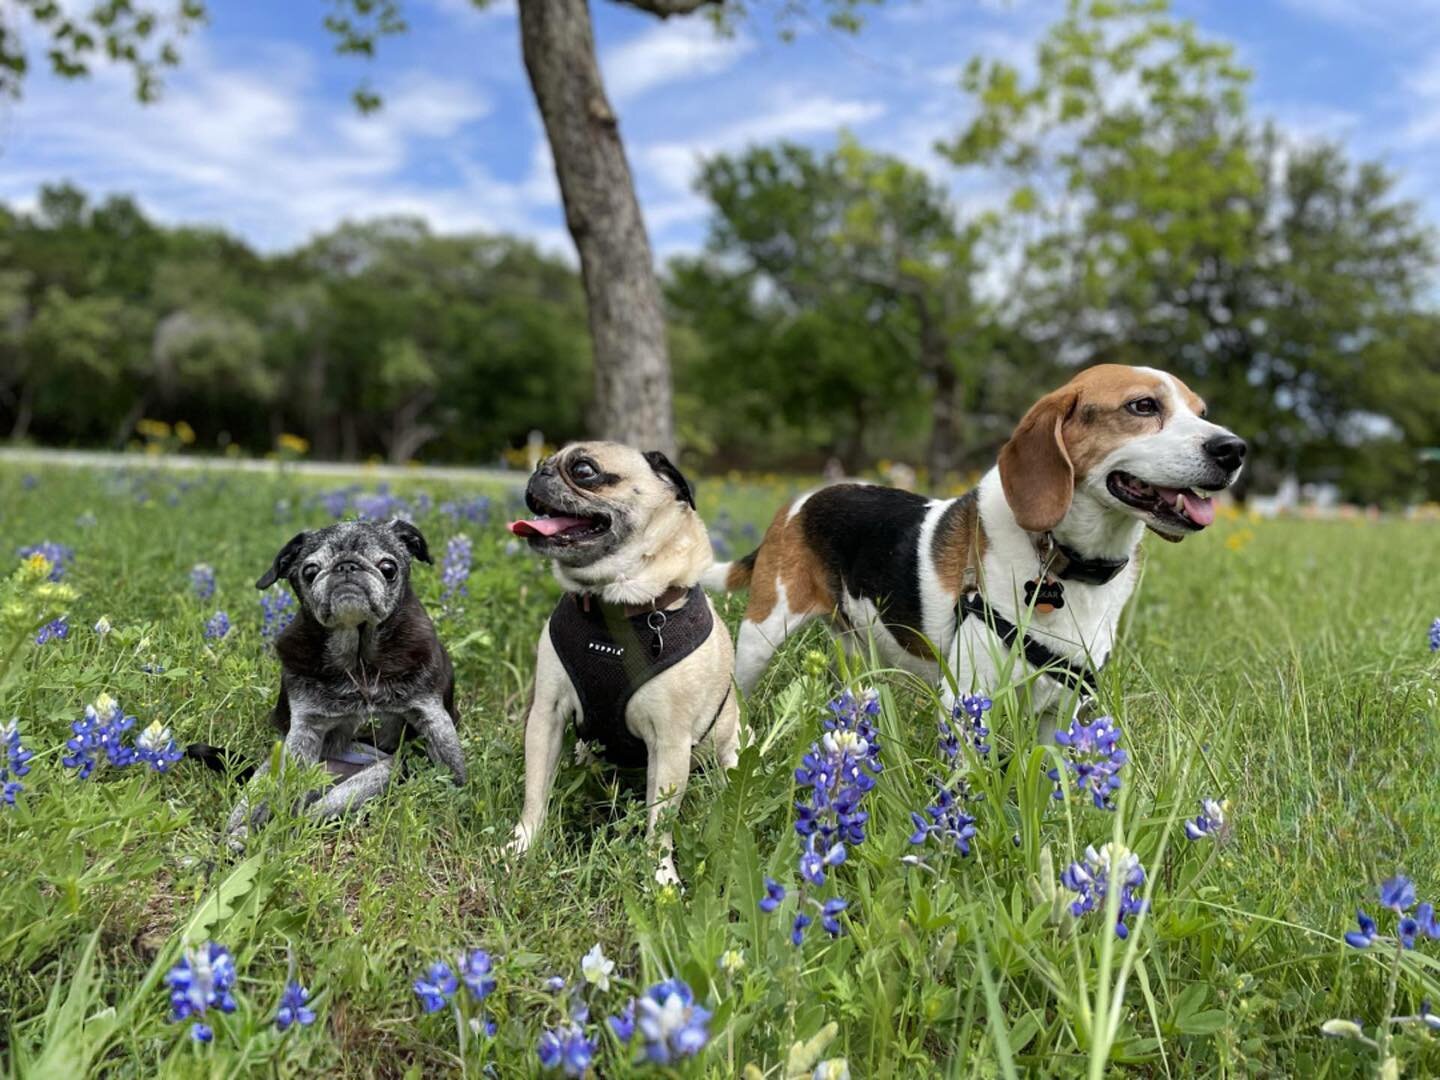 Our attempt at a Bluebonnet pic on our way to Kitefest 🪁 A little weak on the bluebonnets but I&rsquo;ll take it ▫️▫️

We need to up our game next year ▫️There were some serious kites out there ▫️The bat was my fav in the end &hellip; just in time f